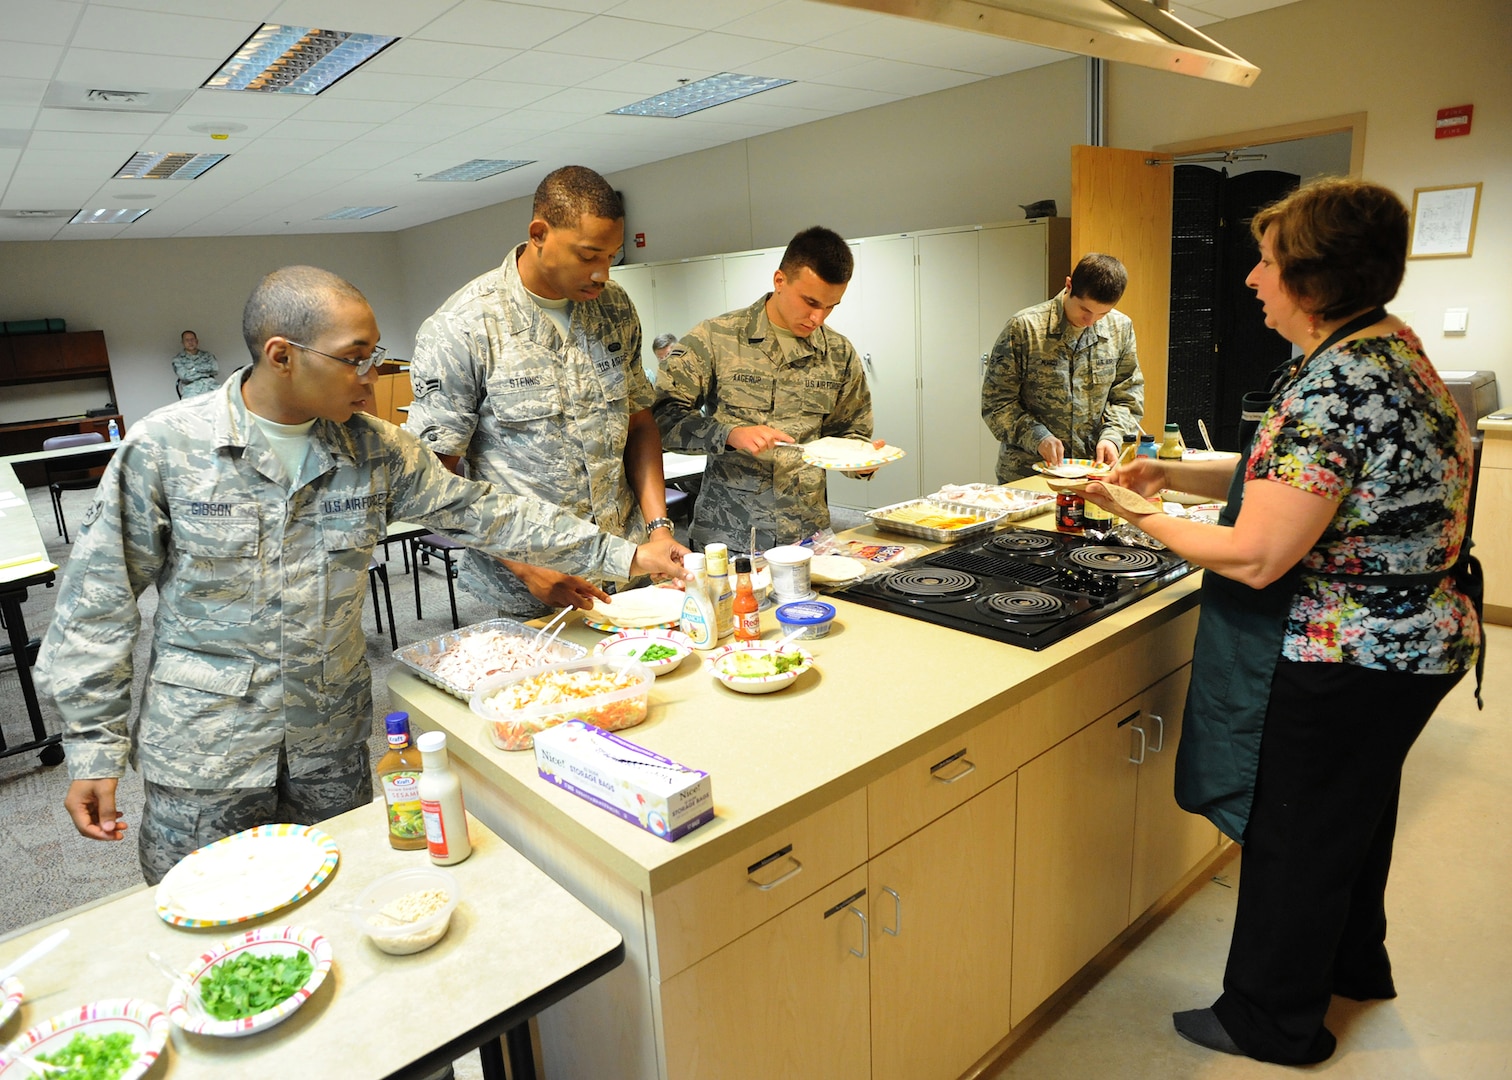 Veteran Chef Dianna Ackerley teaches Joint Base San Antonio-Randolph Airmen healthy cooking habits on a budget while making sandwich wraps and pasta salads during the kitchen addiction cooking class at the Joint Base San Antonio-Randolph Human Performance Resource Center.  The cooking classes, originally designed to provide Airmen cooking skills during the renovation of the JBSA-Randolph Rendezvous  Dining Facility, is now open to all Airmen E-4 and below.  (U.S. Air Force photo by Melissa Peterson)